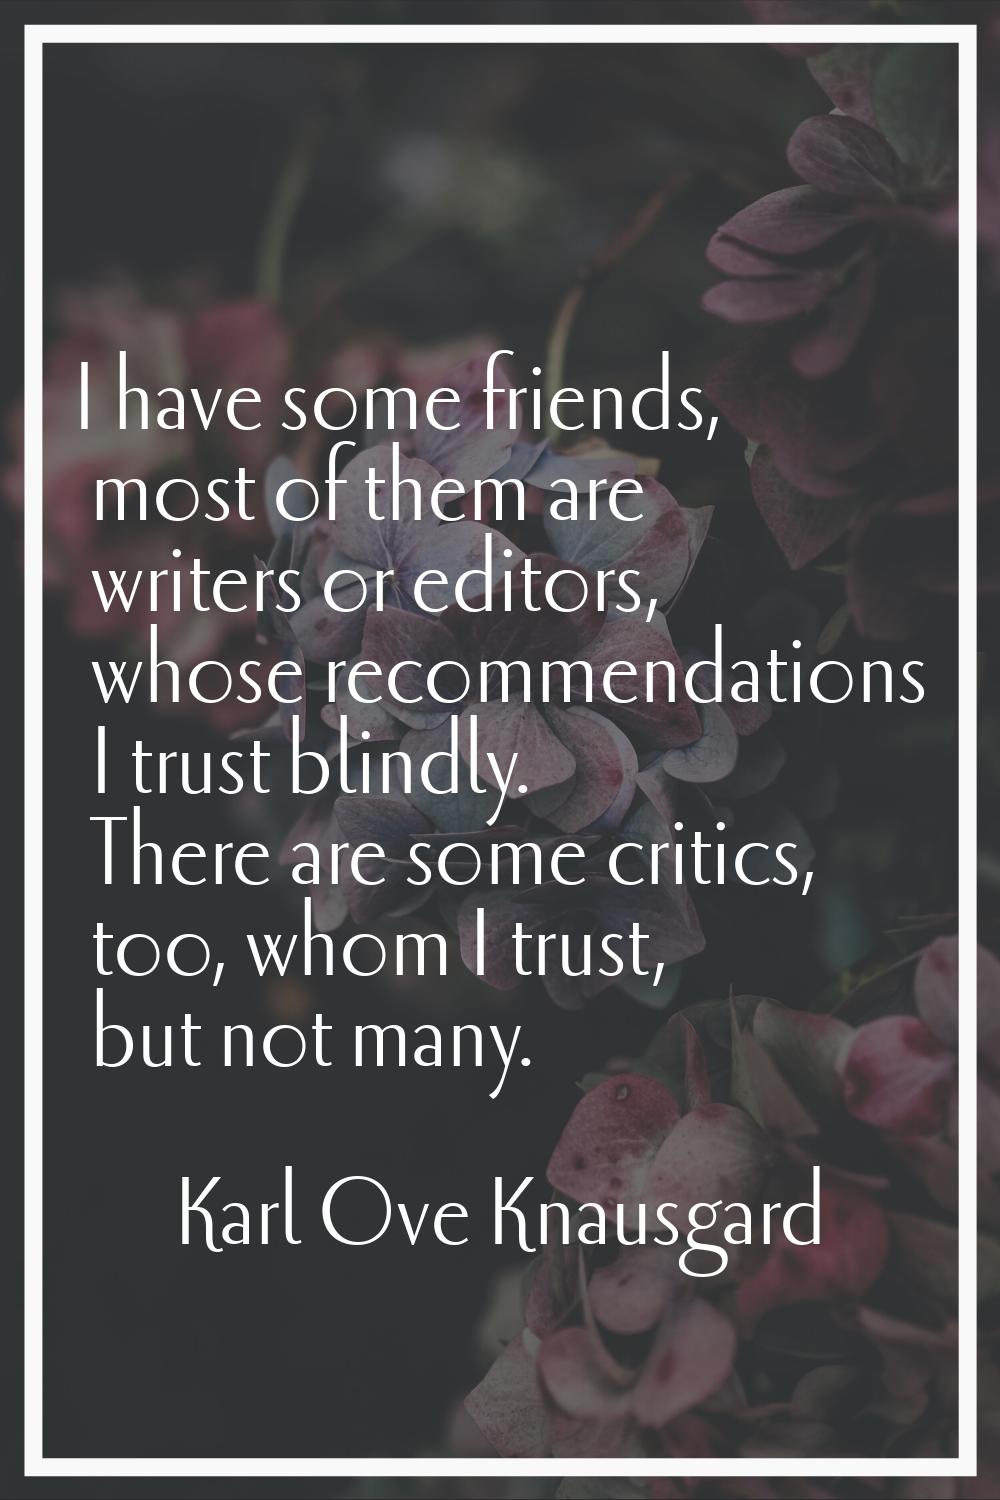 I have some friends, most of them are writers or editors, whose recommendations I trust blindly. Th